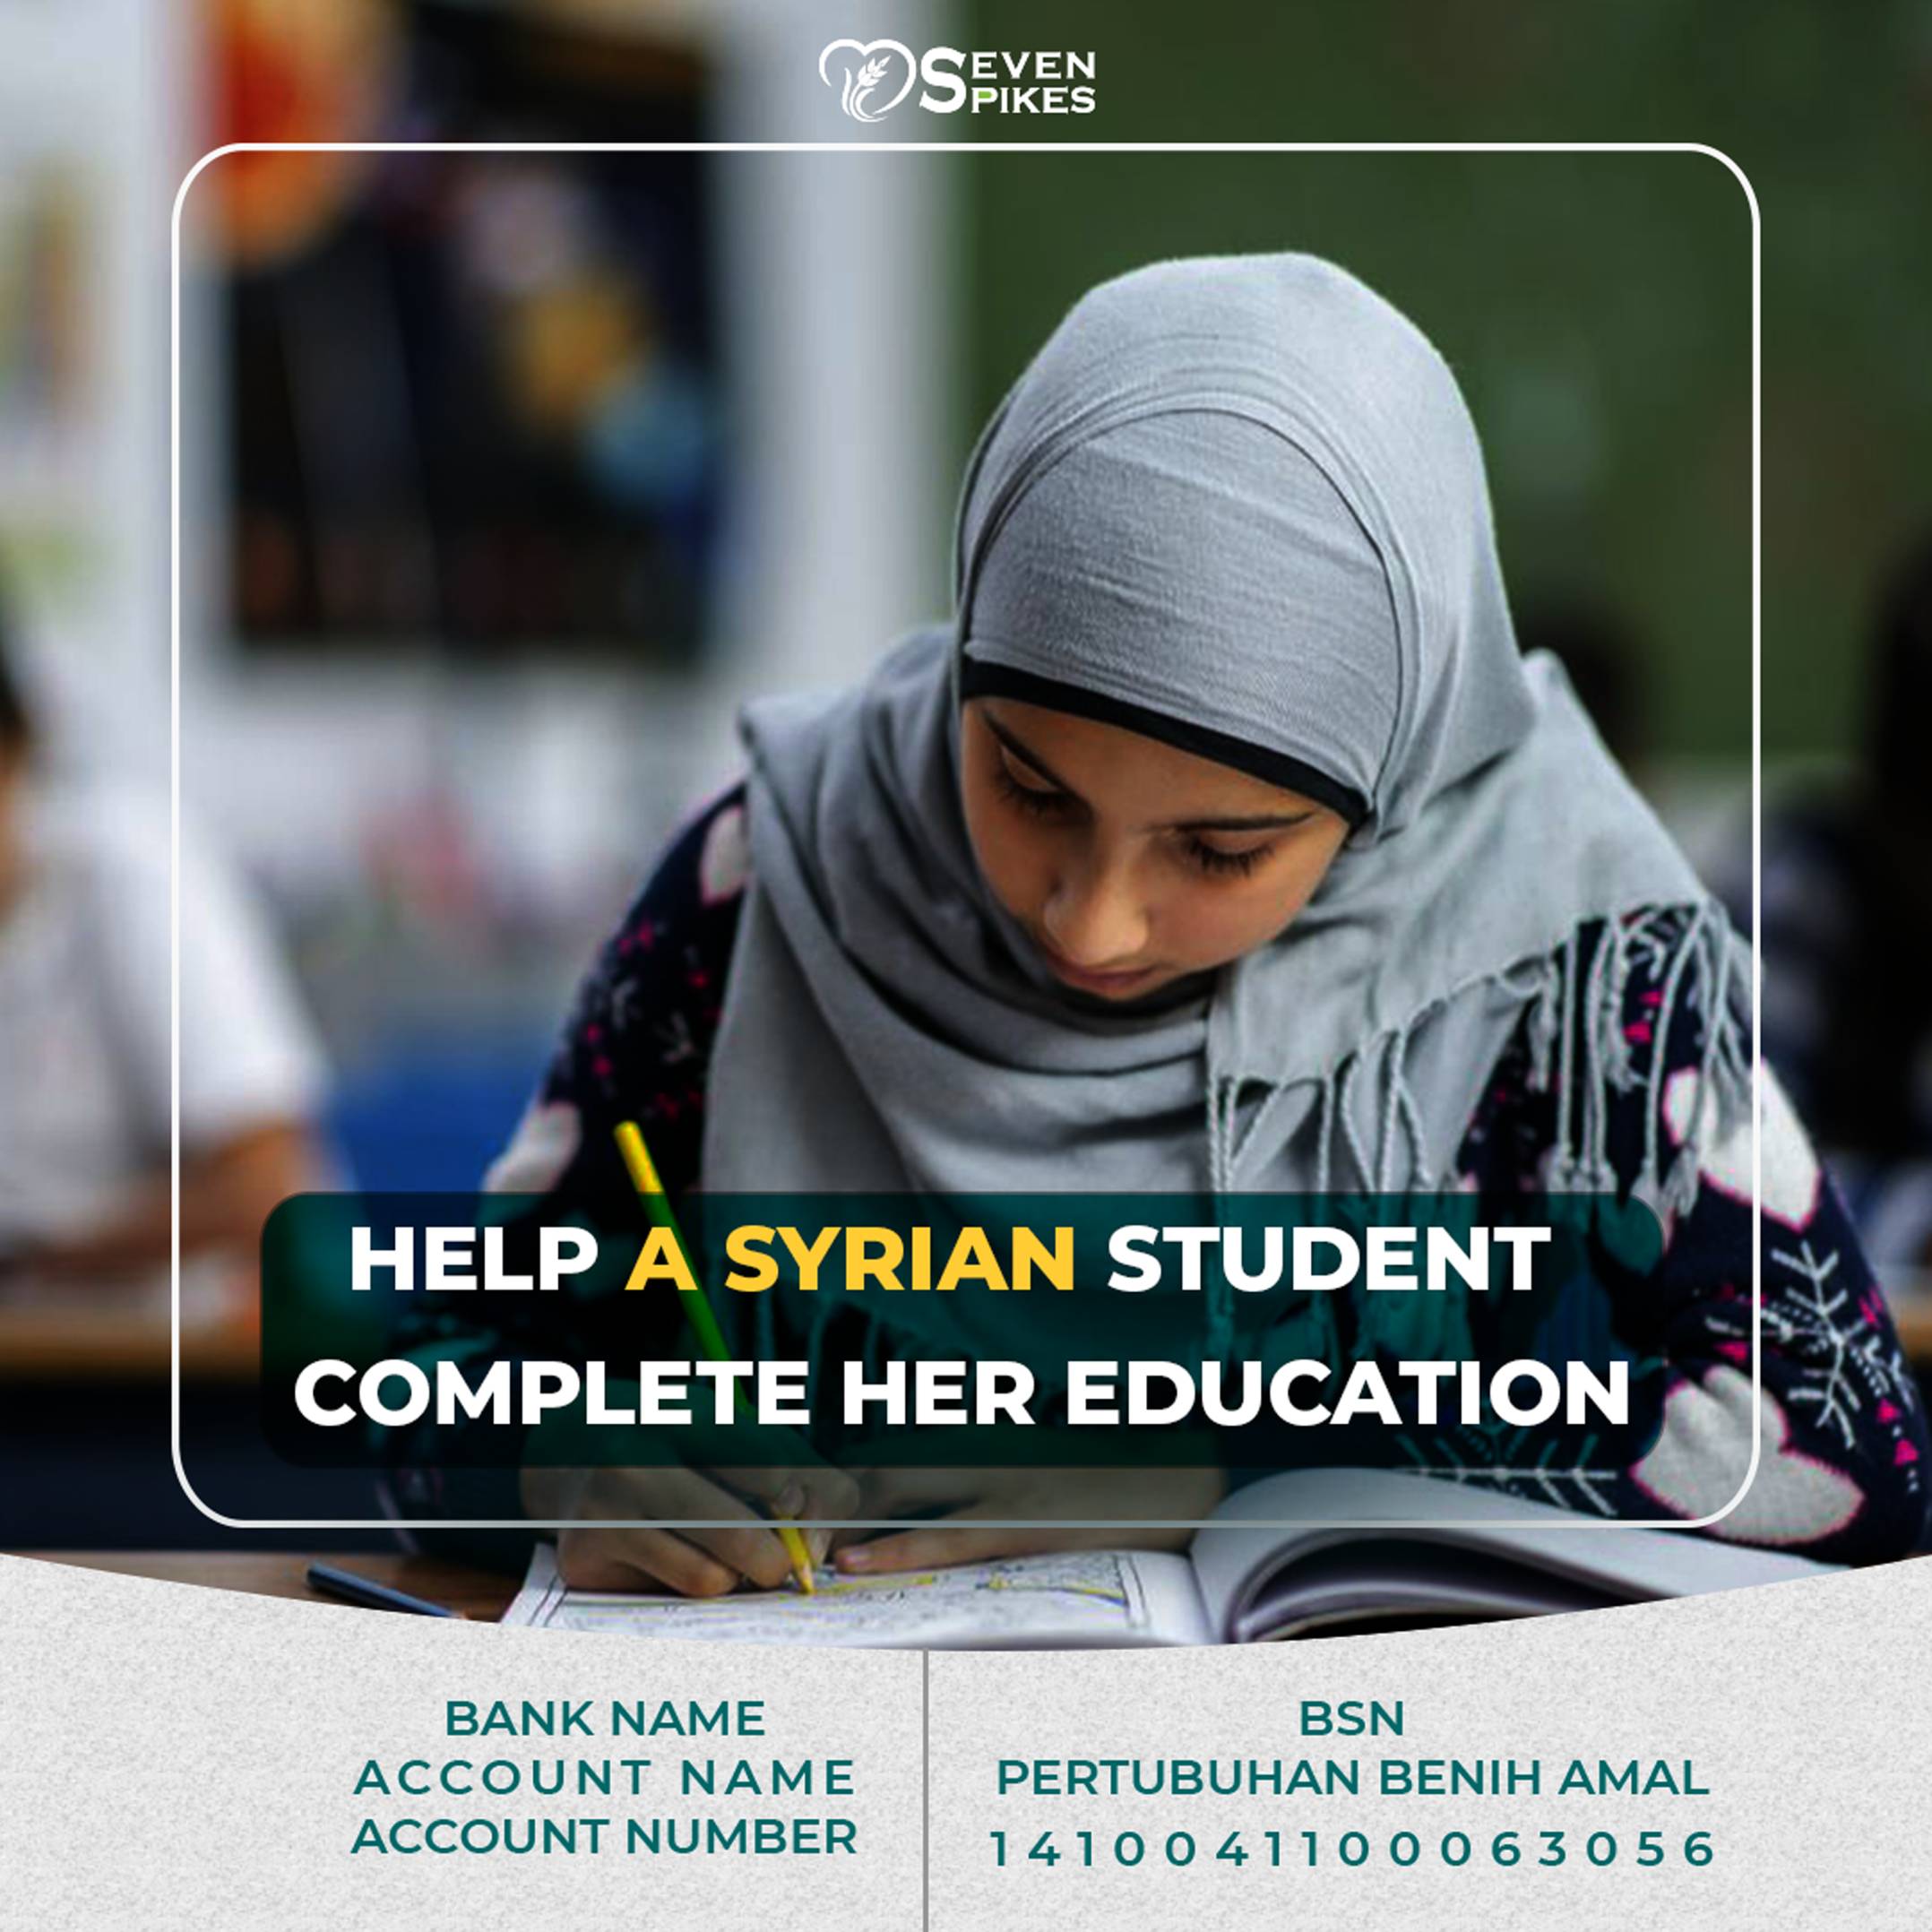 Help A Syrian student complete her education